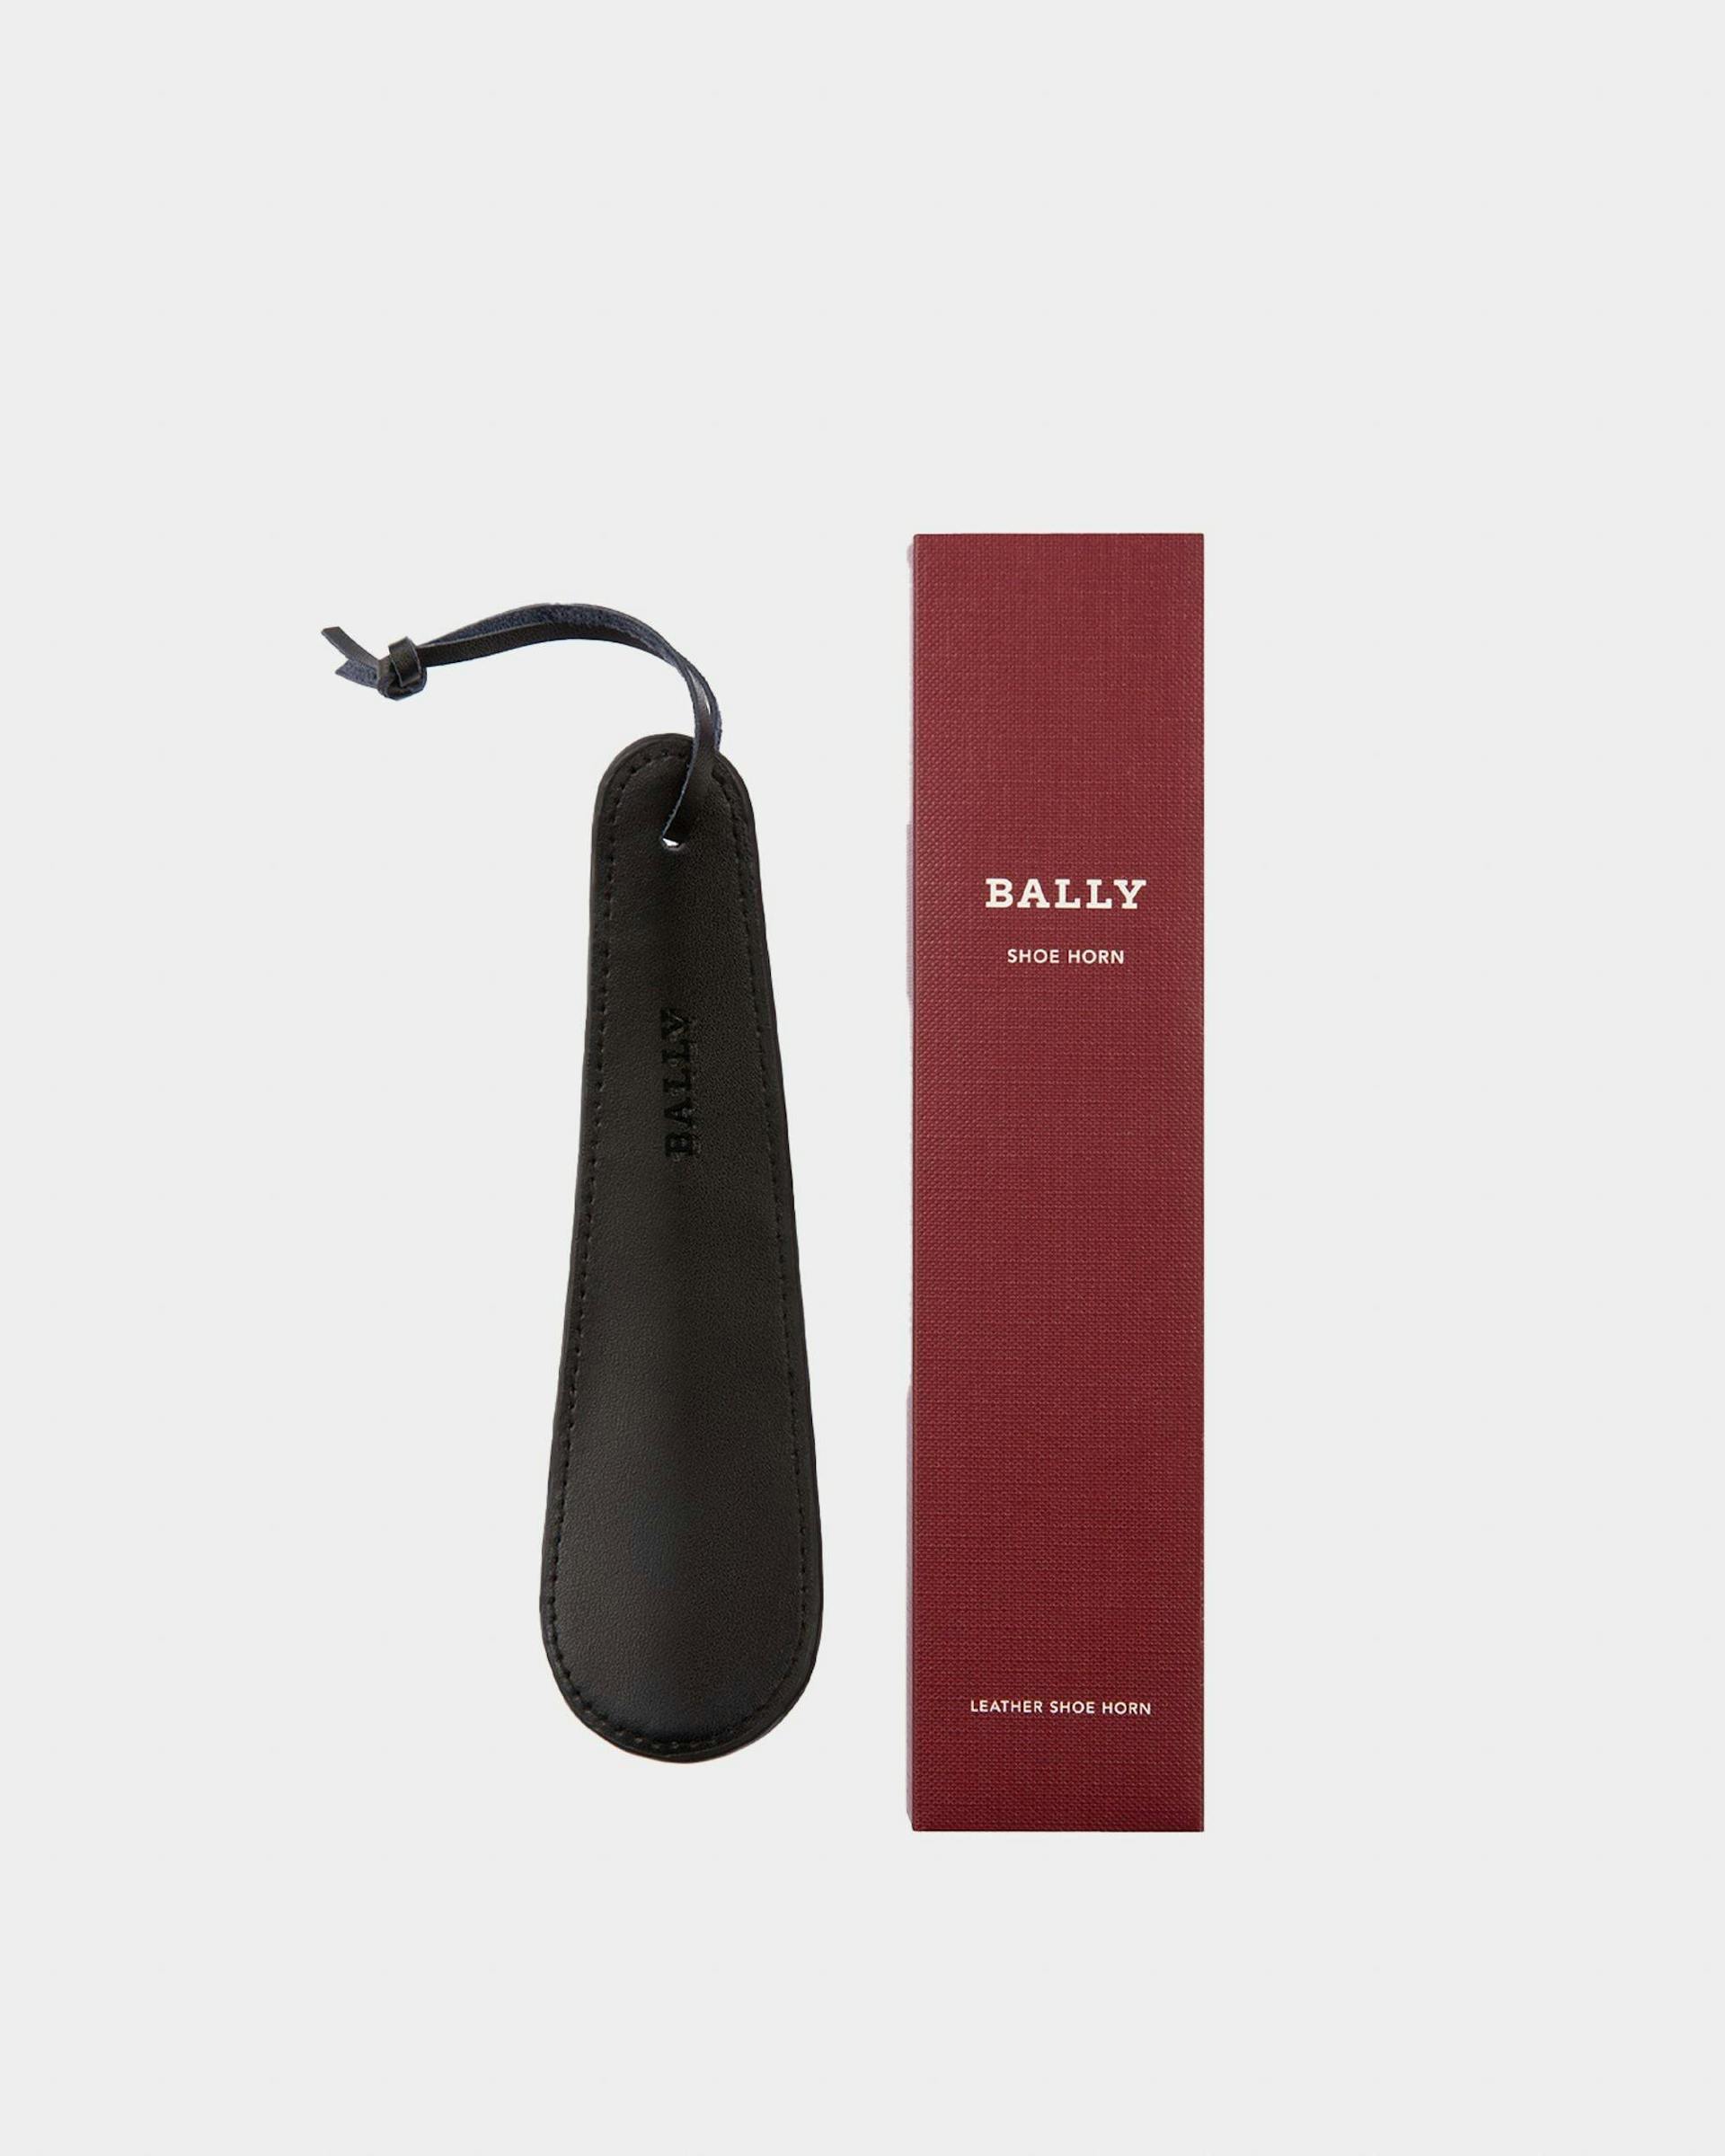 Shoehorn Shoe Care Accessory For All Shoes - Men's - Bally - 01